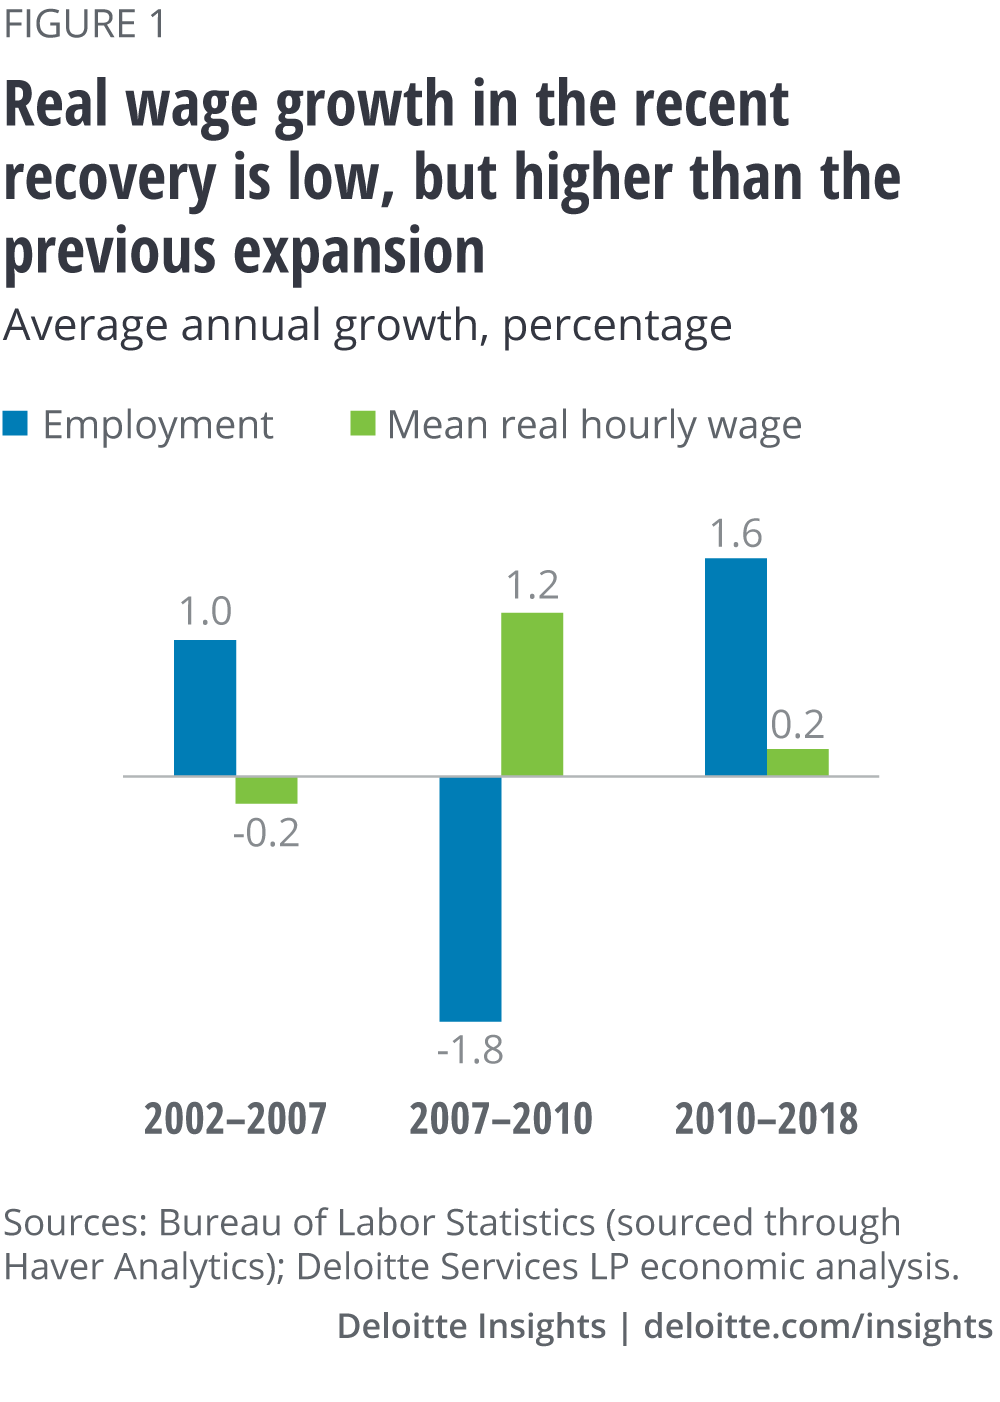 Real wage growth in the current recovery is low, but higher than the previous expansion